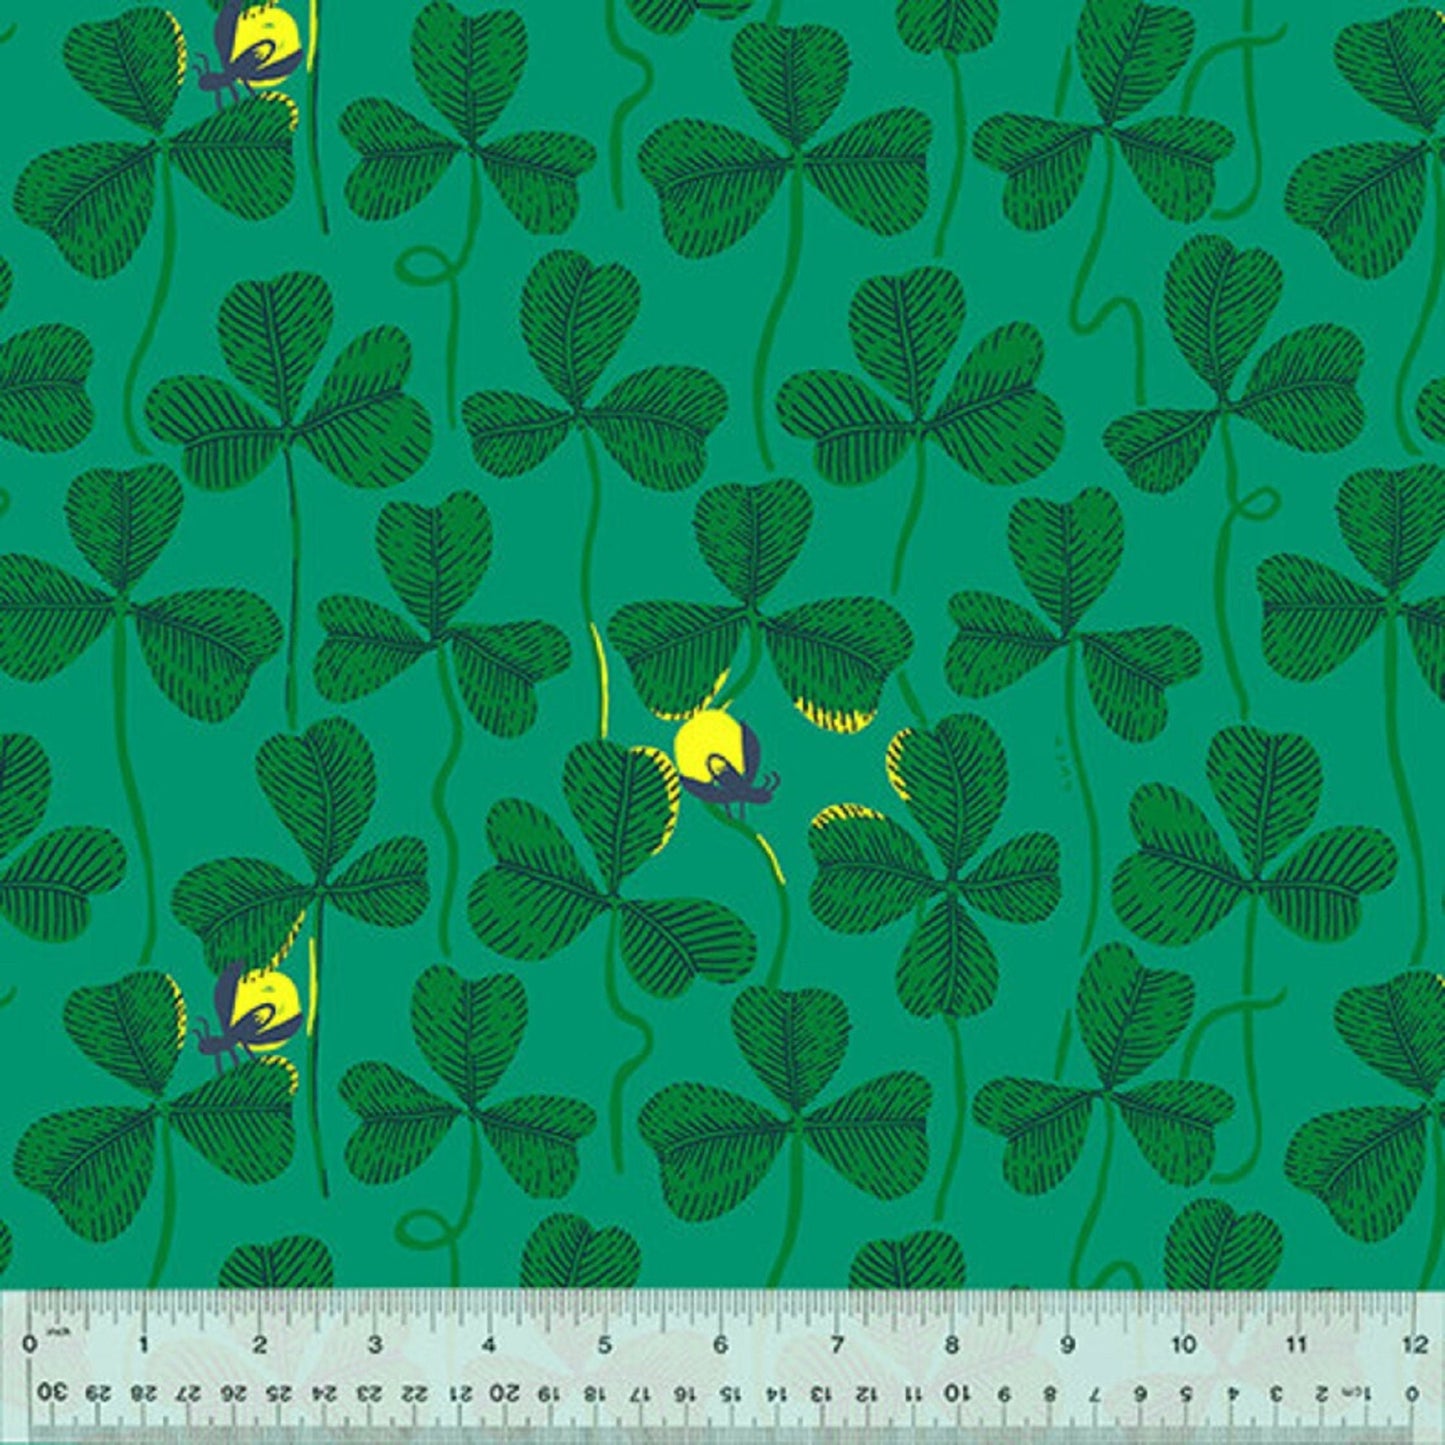 Fireflies Green 108" WIDEBACK Heather Ross Windham Fabrics Quilters Cotton Quilt Backing Continuous Half Yard Cuts Fabric Fetish